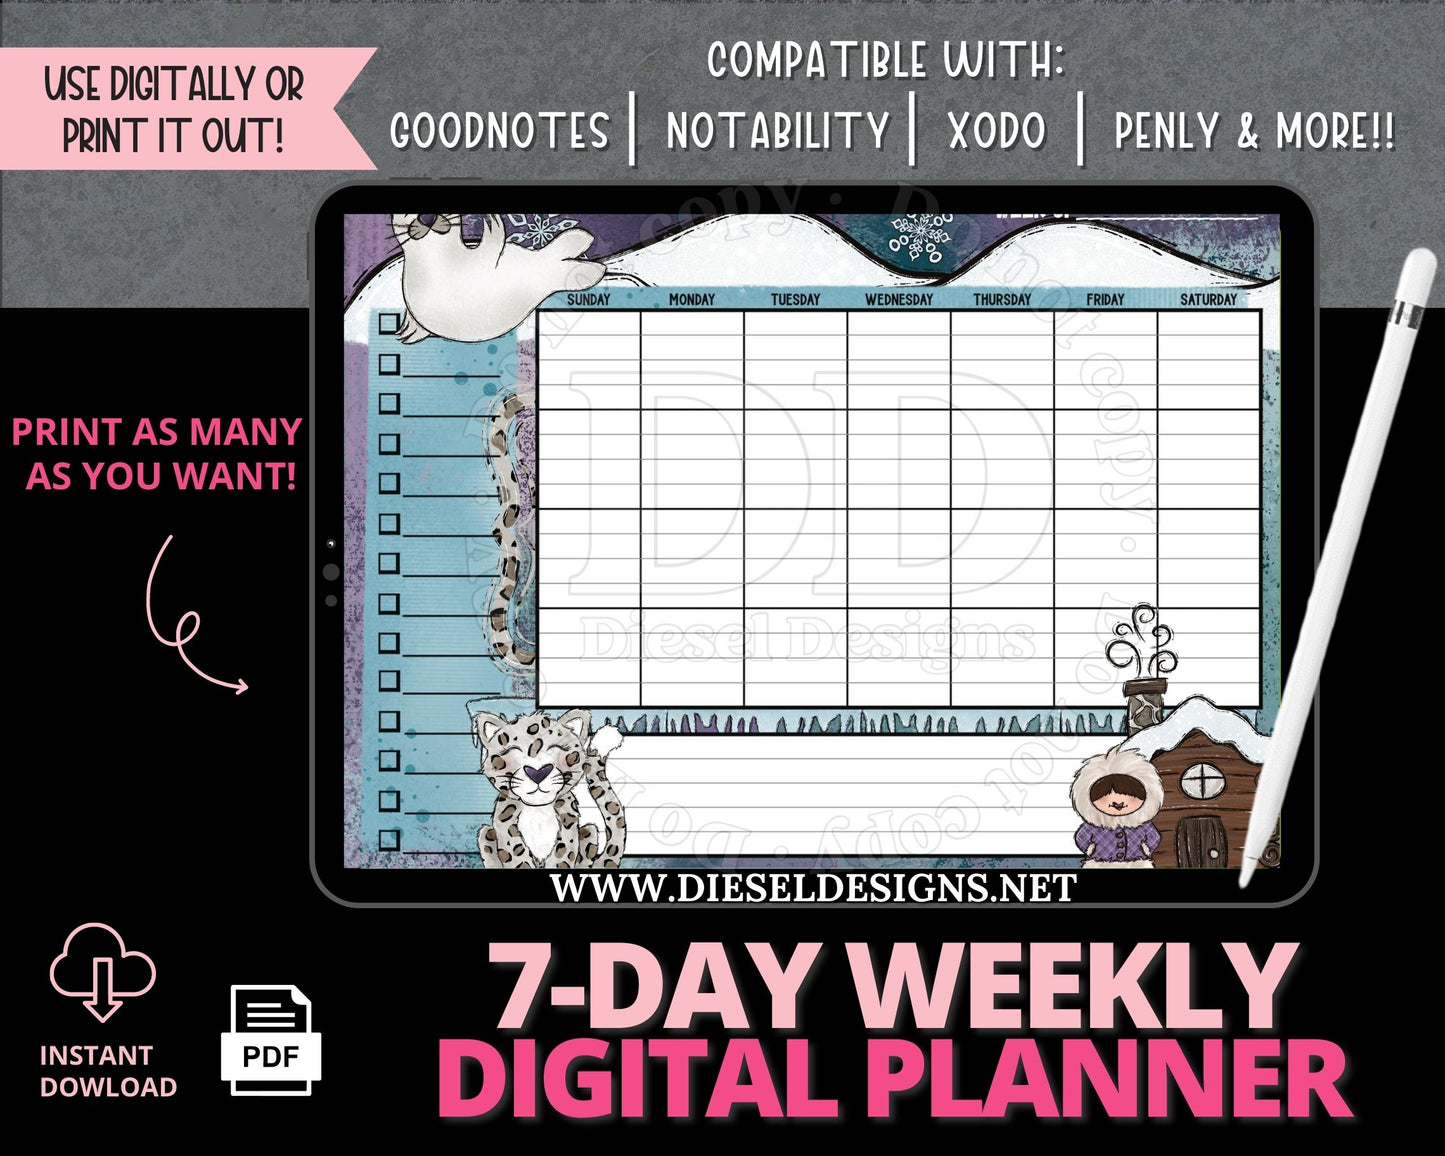 Weekly Planner 10 | 7-Day Digital Planner | 300 DPI | PNG & PDF included